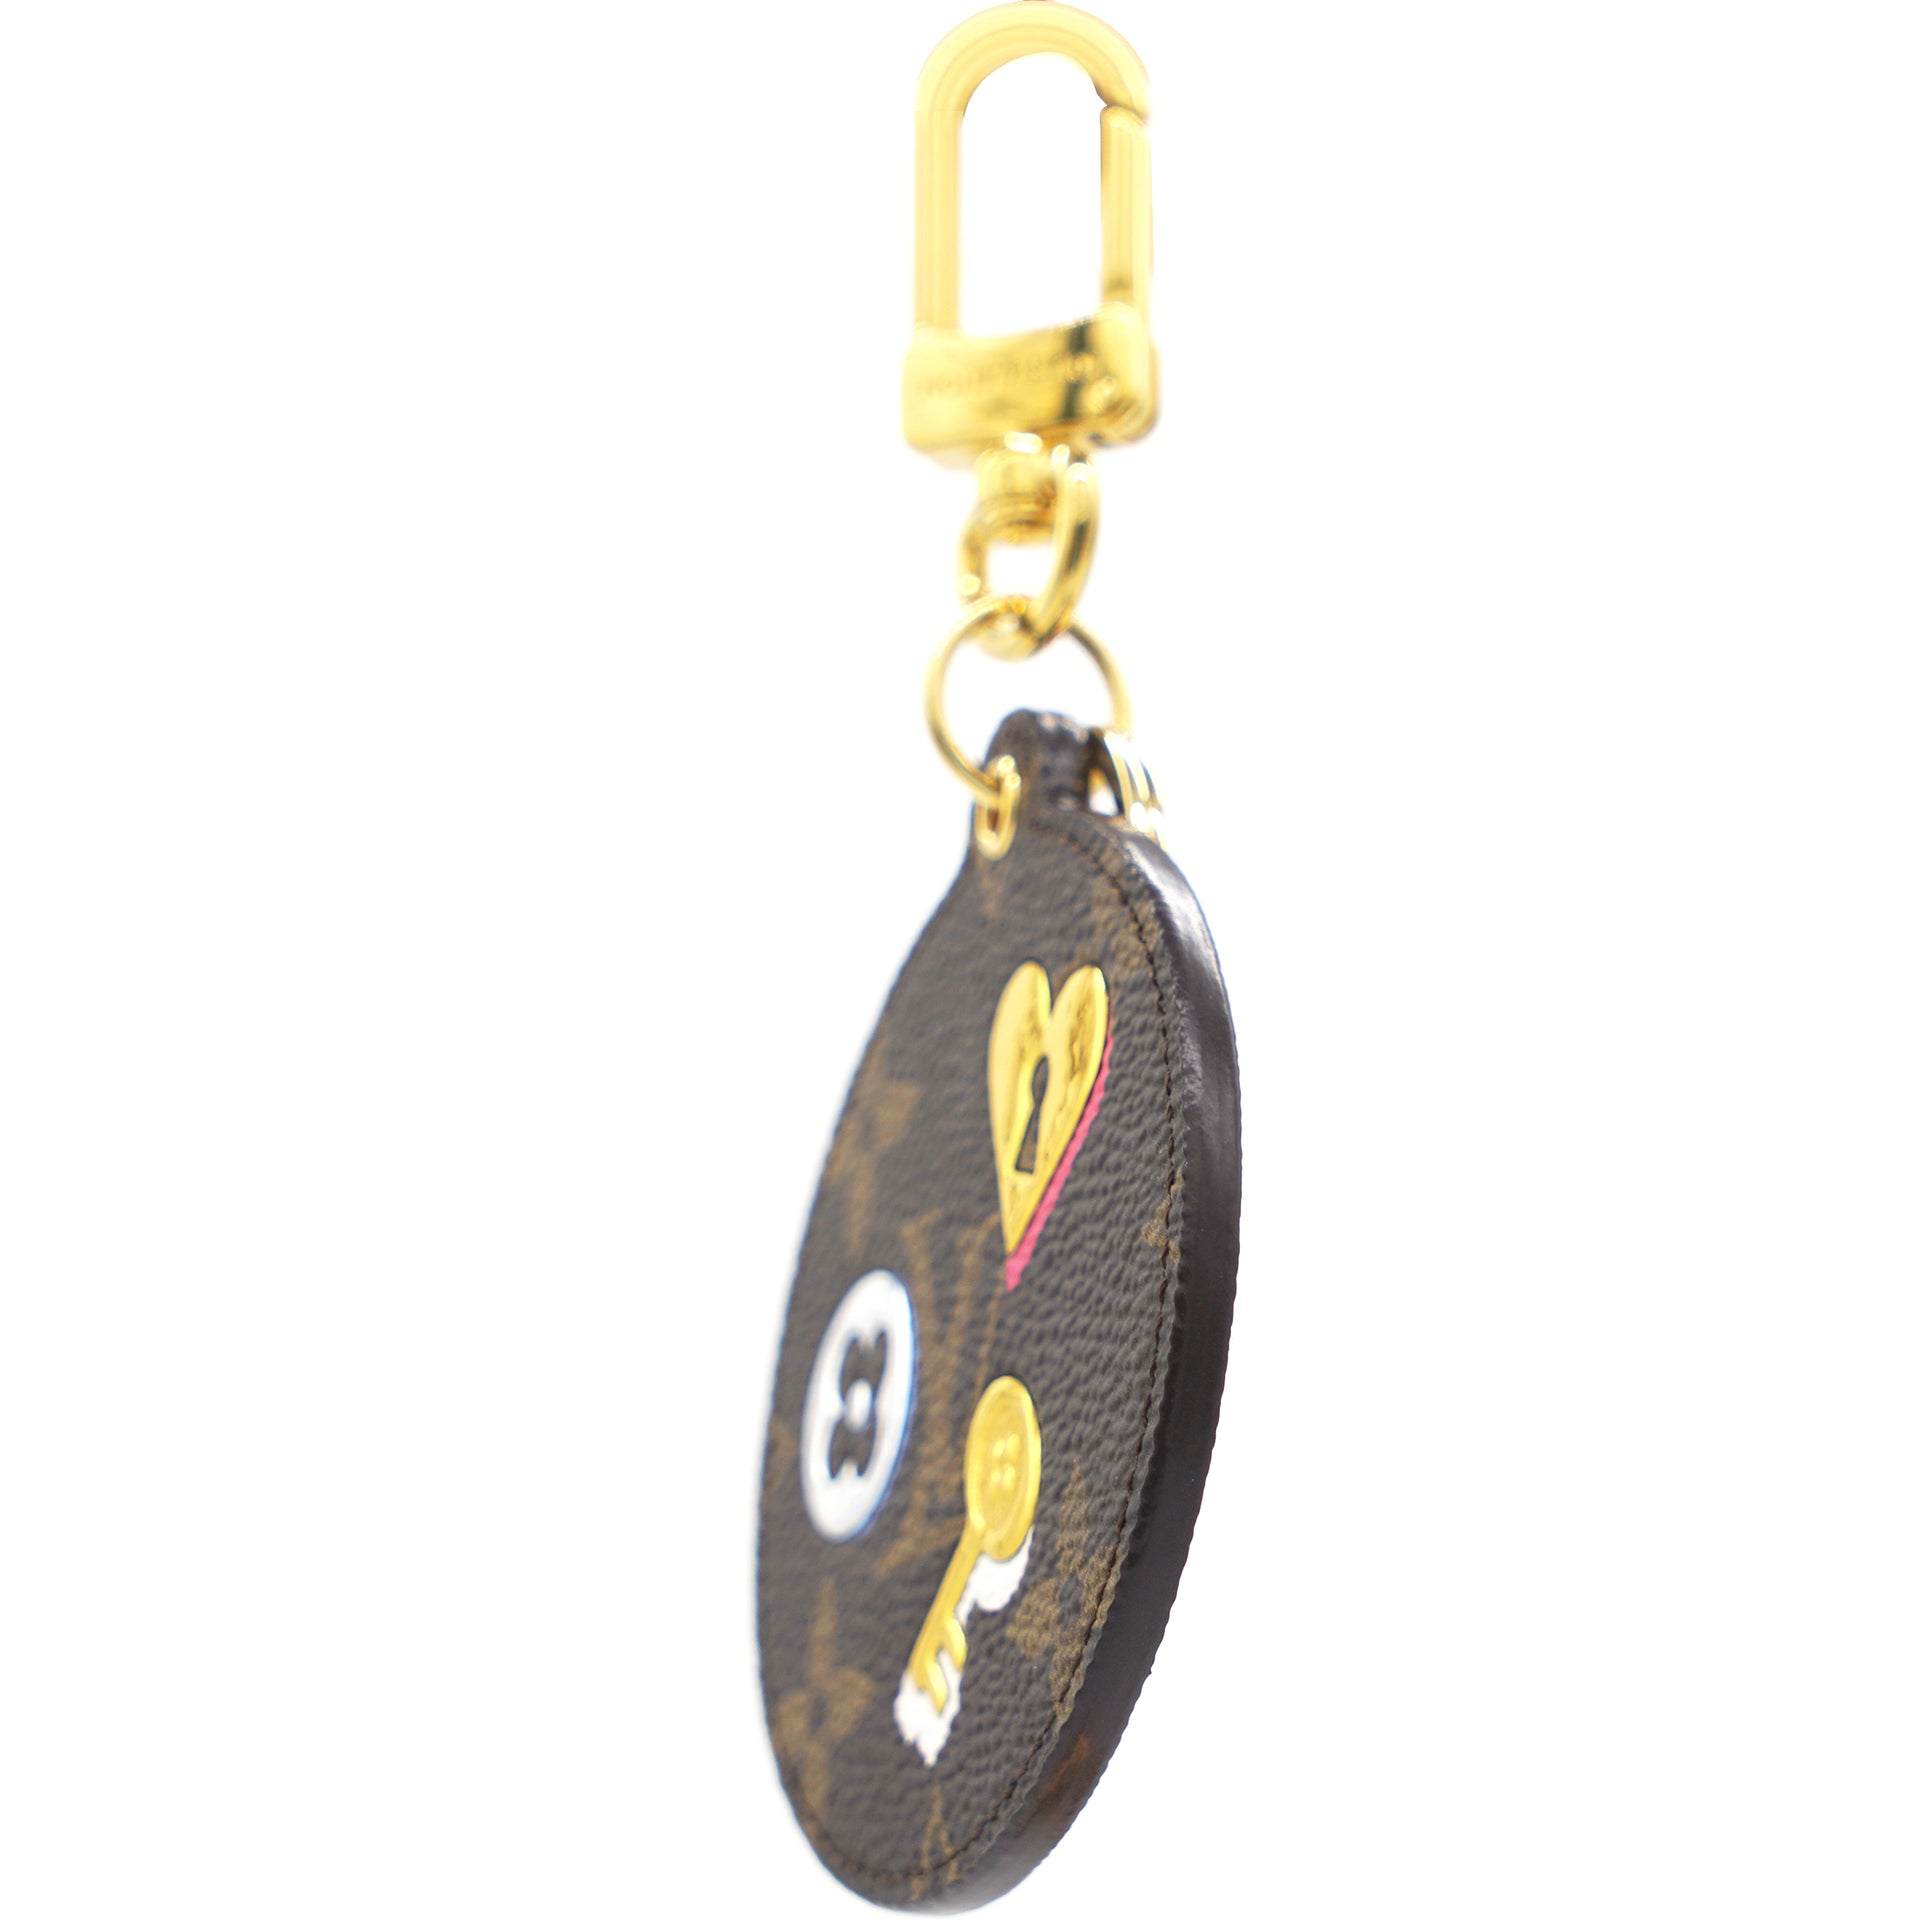 Louis Vuitton - Authenticated Monogram Bag Charm - Metal Gold for Women, Very Good Condition